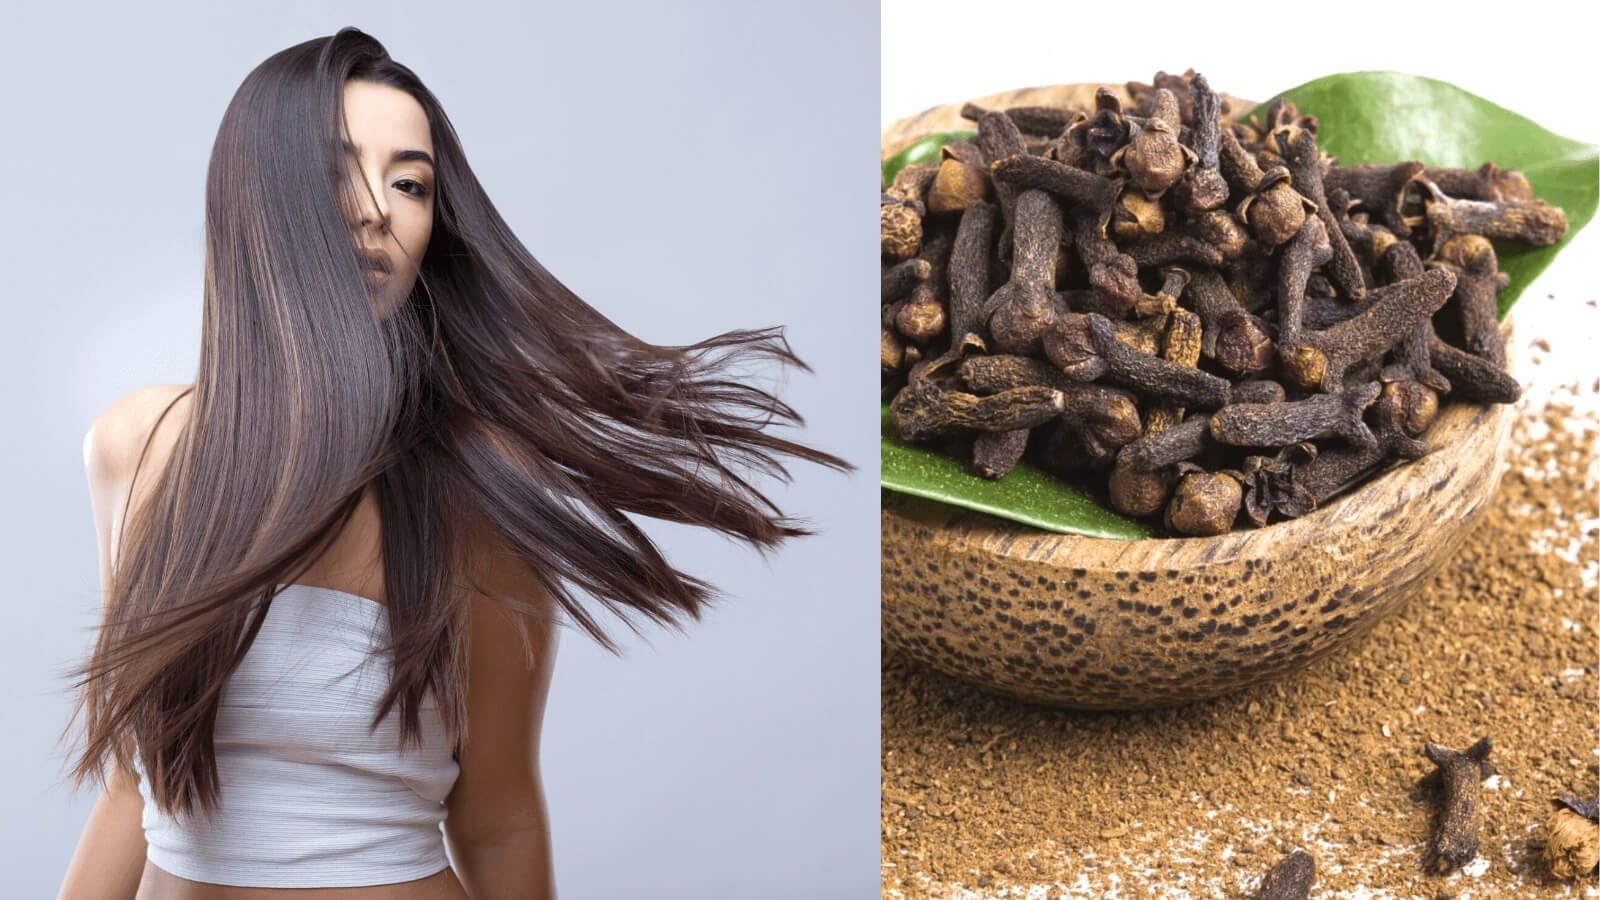 How to Use Cloves for Hair Growth at Home? - Beauty Tips By Nim